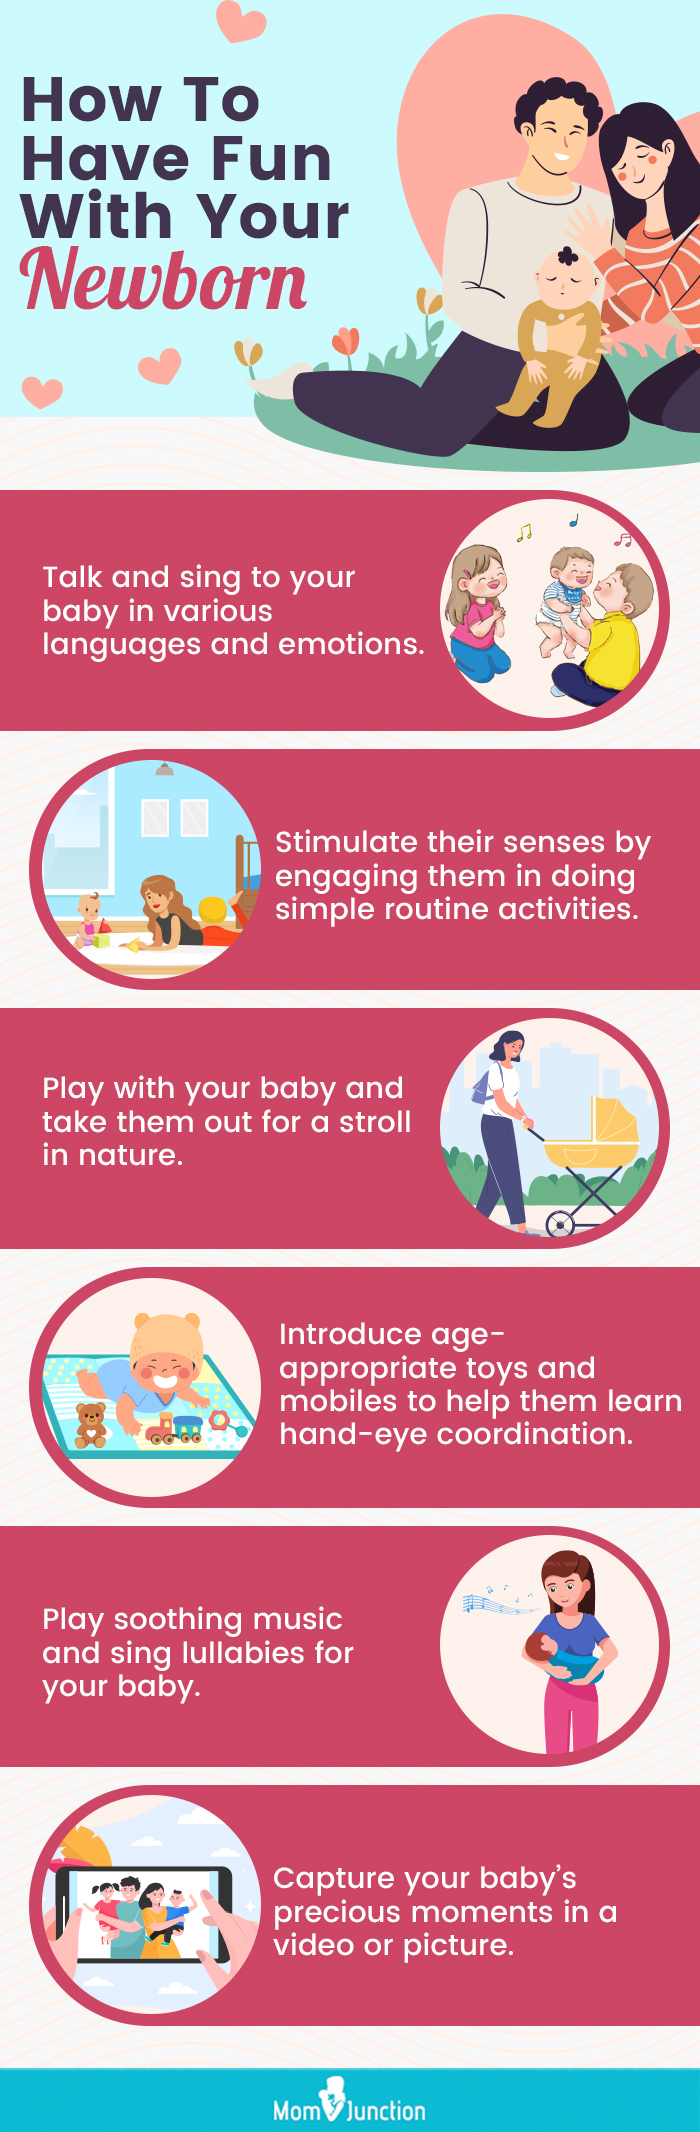 how to have fun with your newborn [infographic]